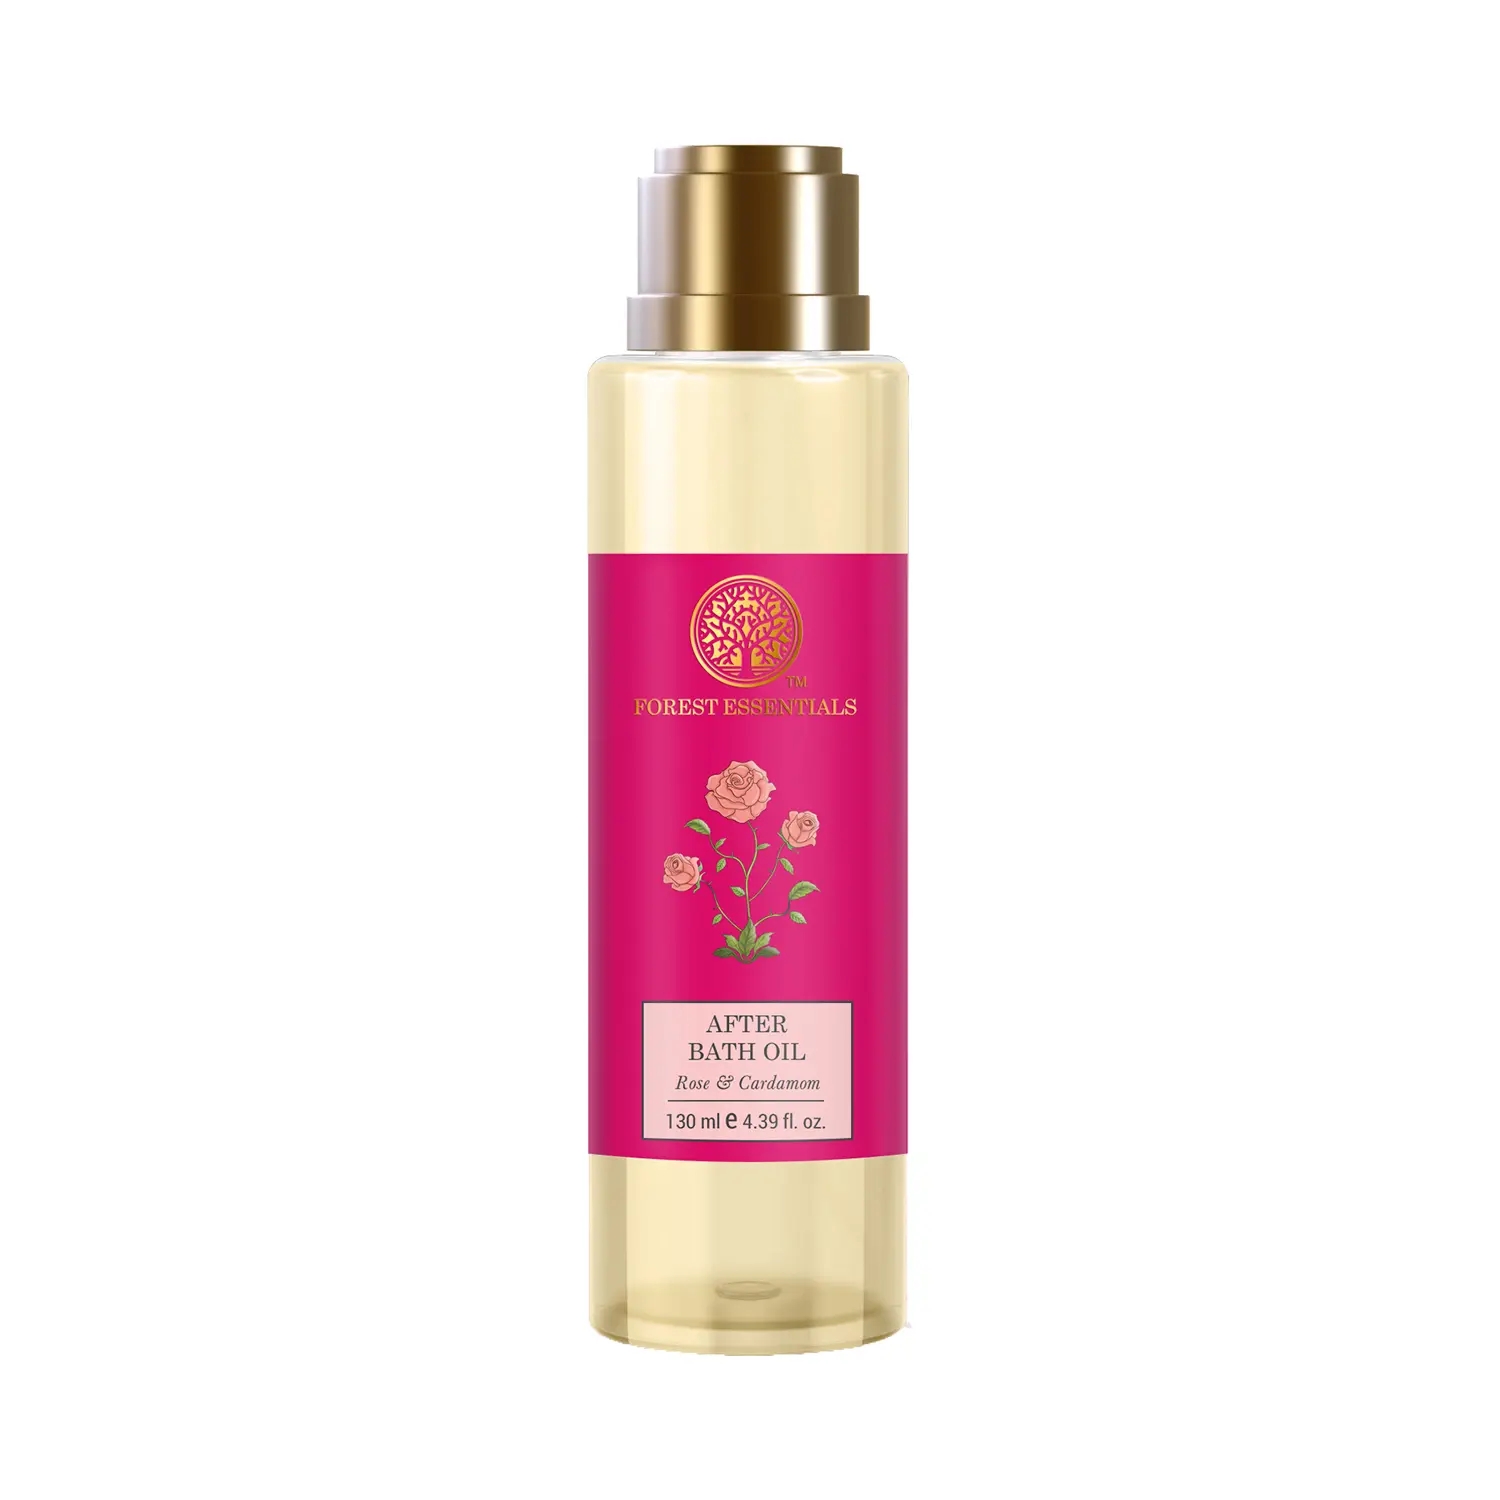 Forest Essentials | Forest Essentials Indian Rose Absolute After Bath Oil (130ml)